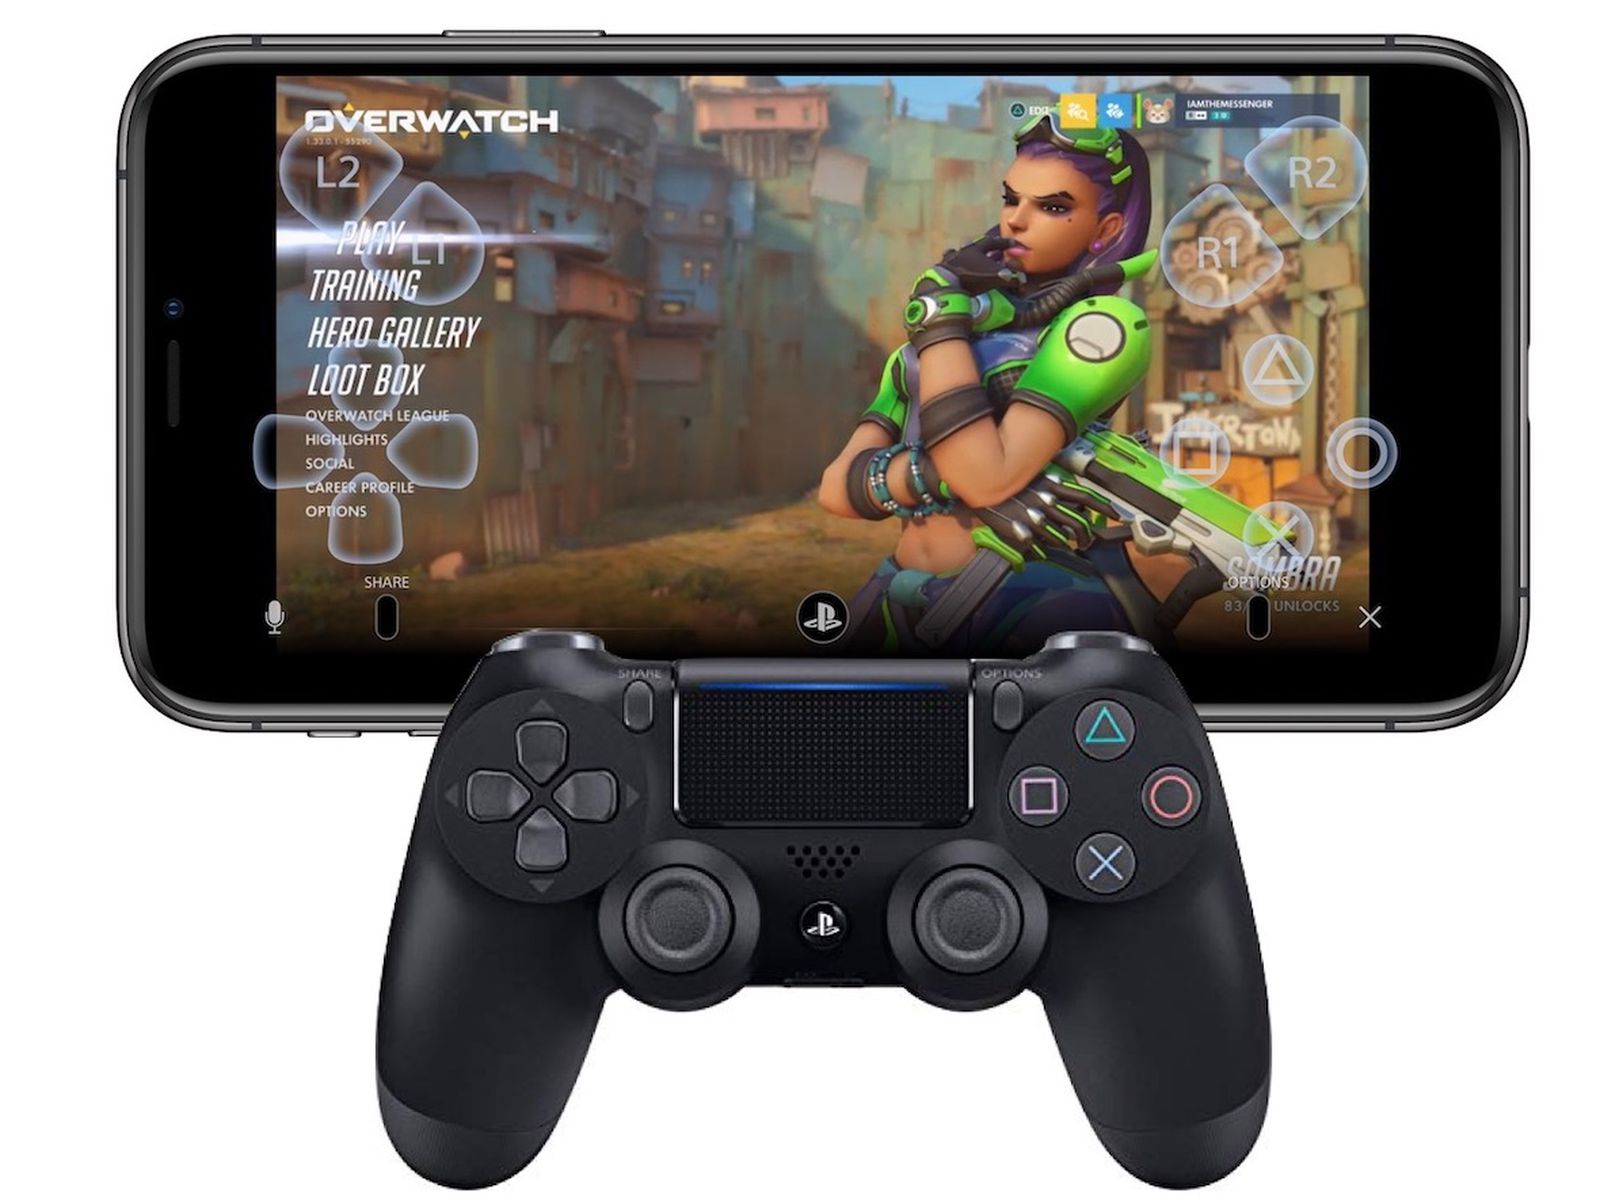 iOS 13 Will Turn Your iPhone into a Mobile PS4 Thanks to DualShock 4 Support and Play App - MacRumors